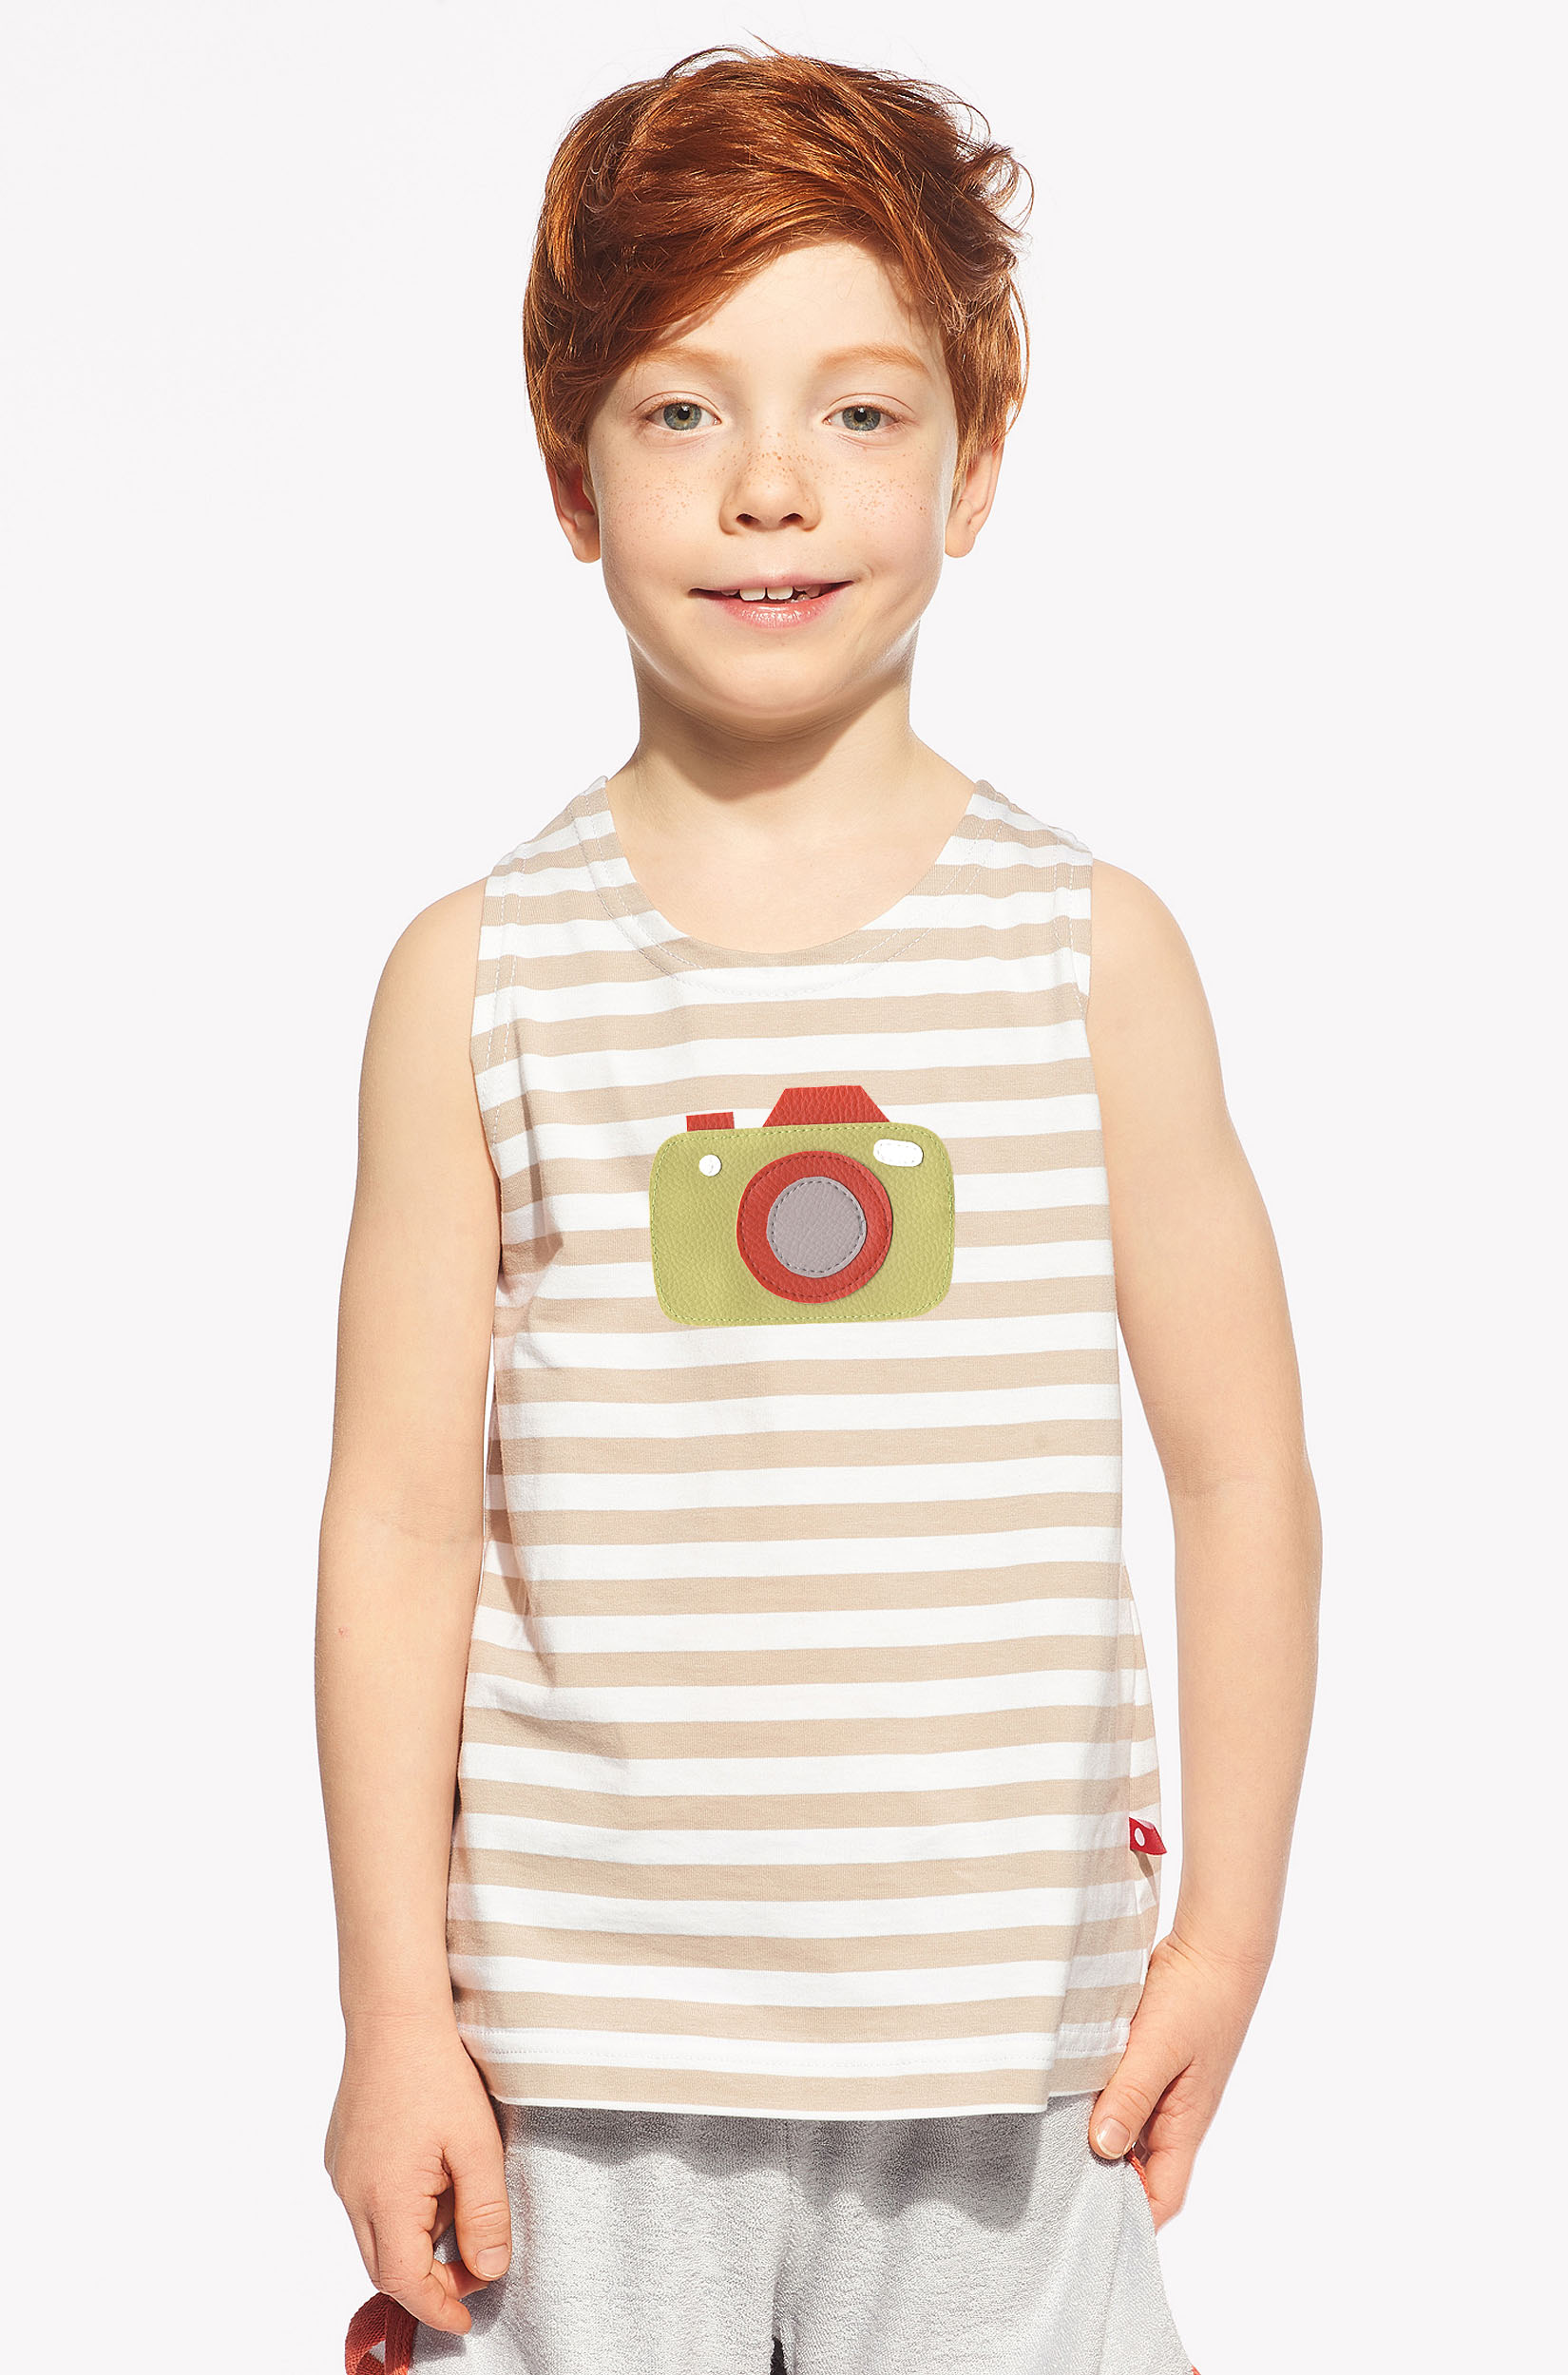 Singlet with camera